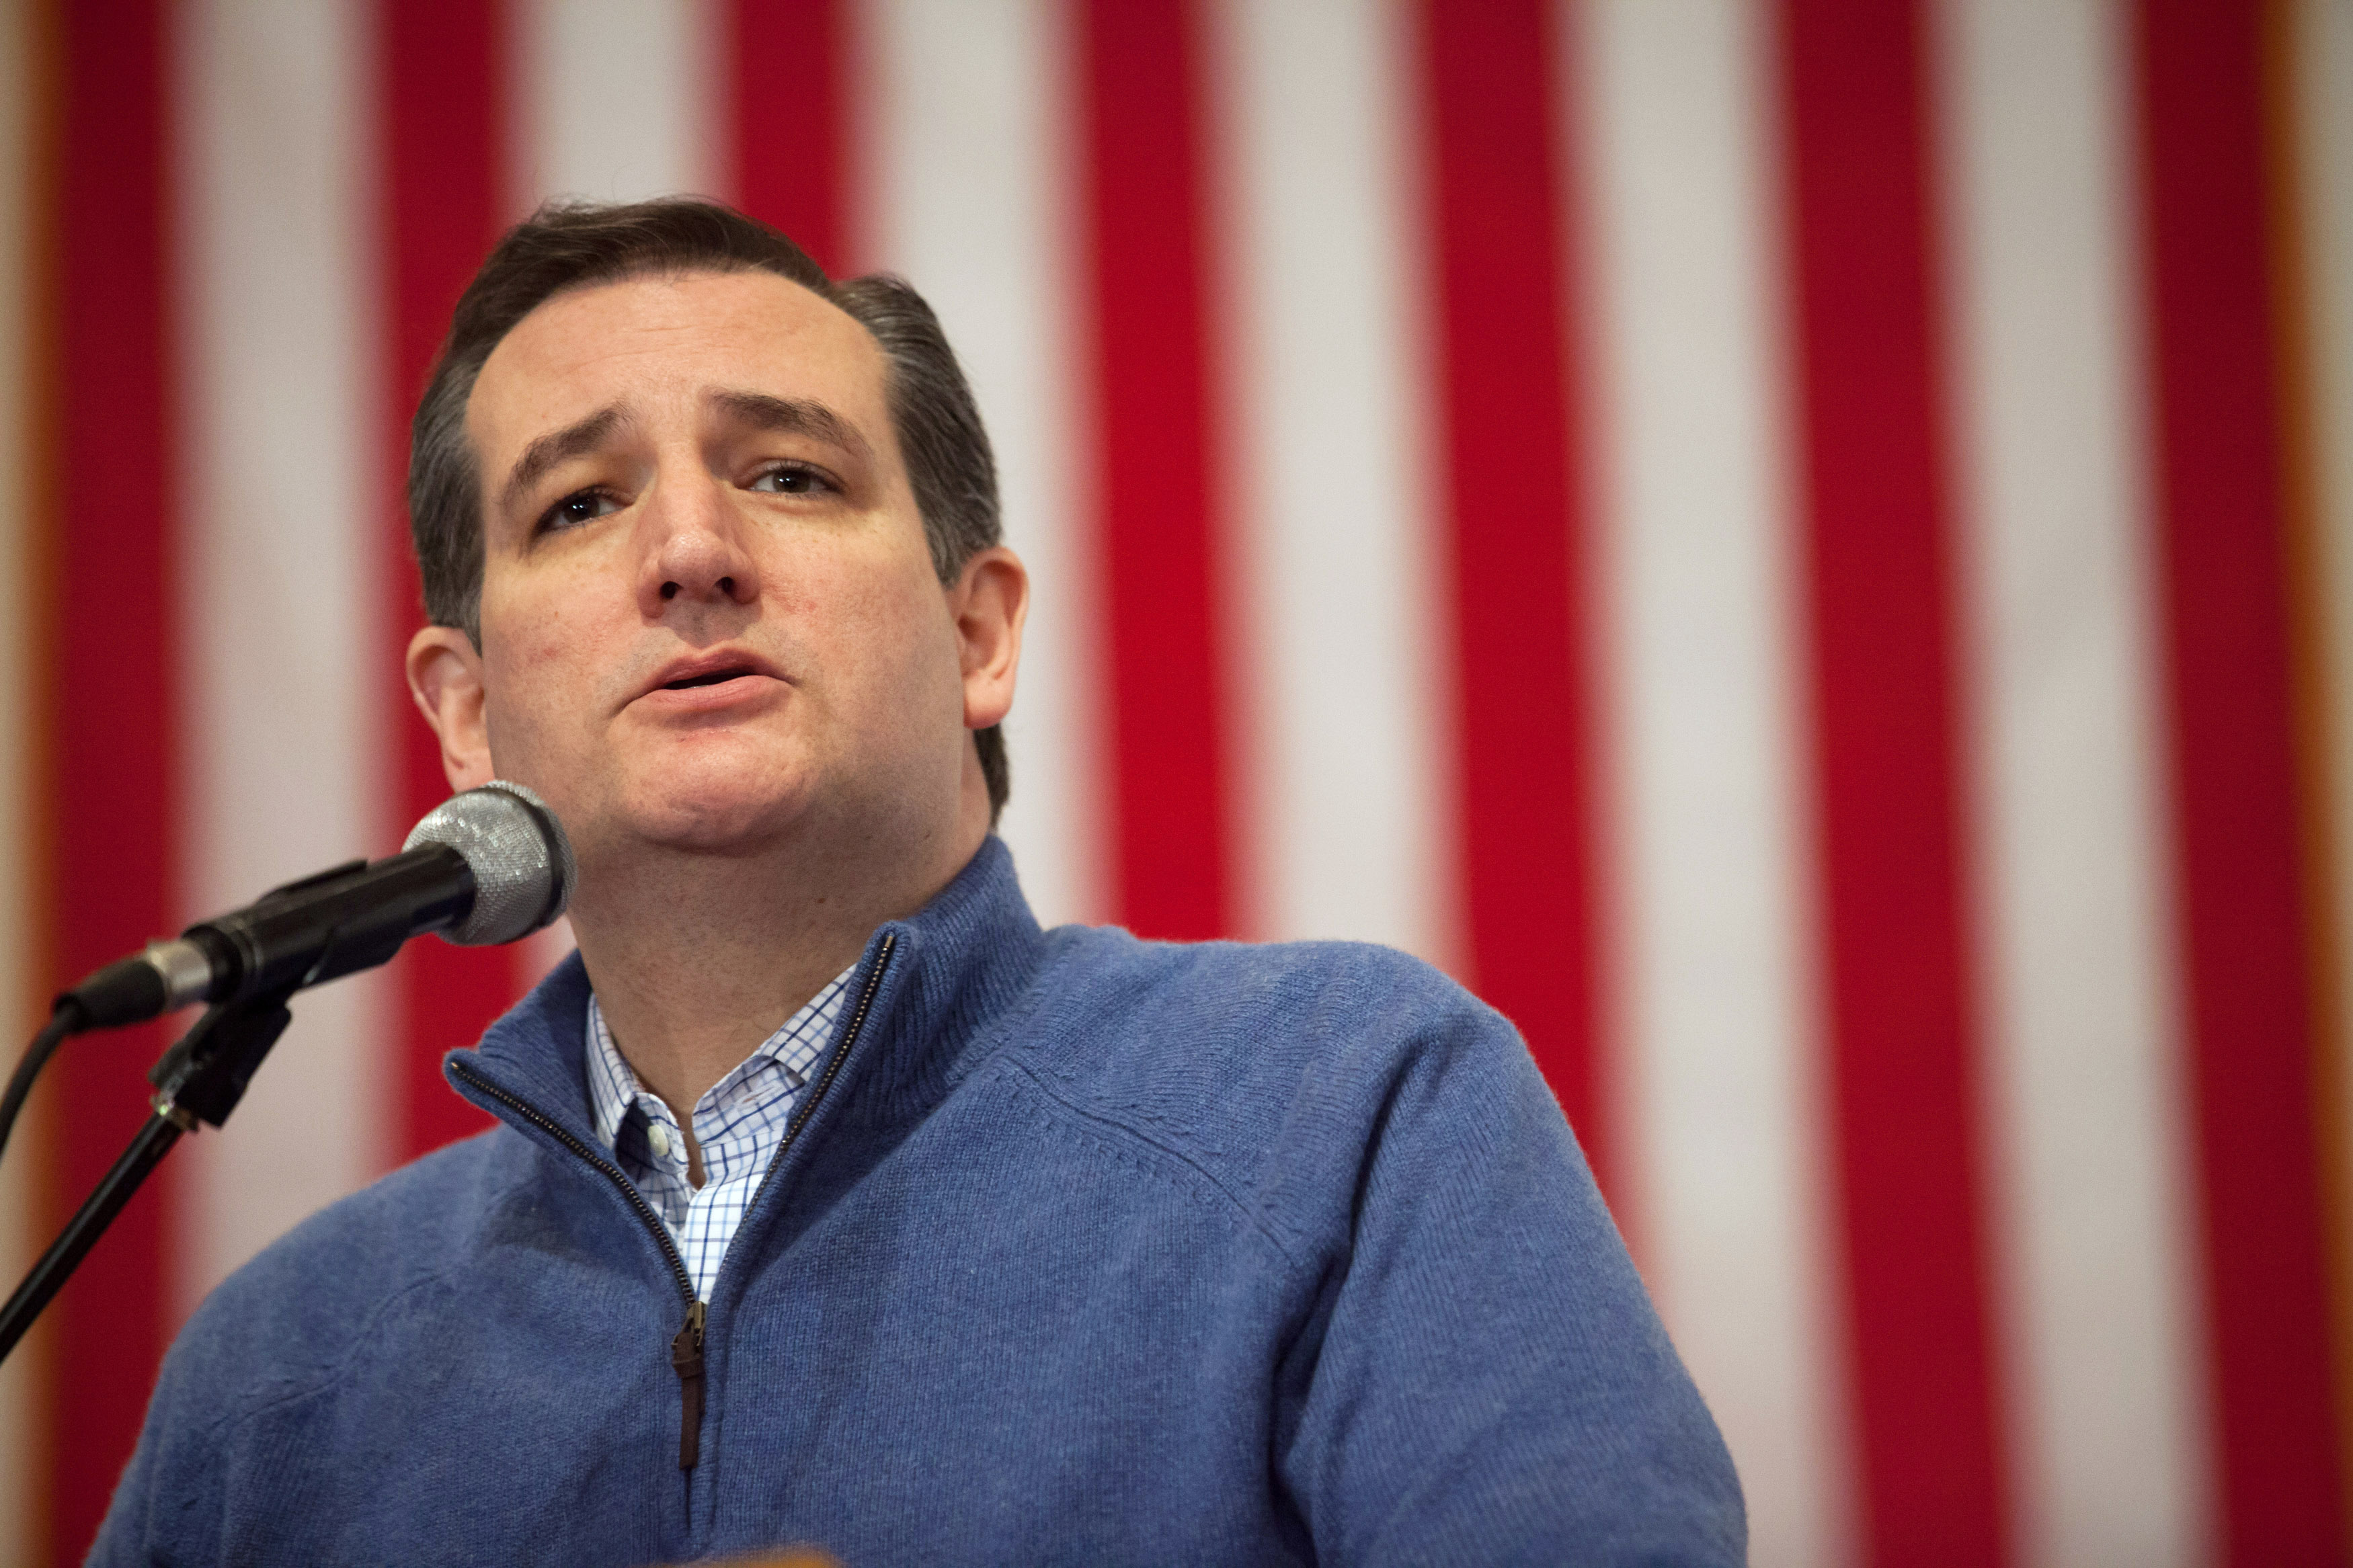 Will Ted Cruz Win The New Hampshire Primary? The Polls Are Not In His Favor